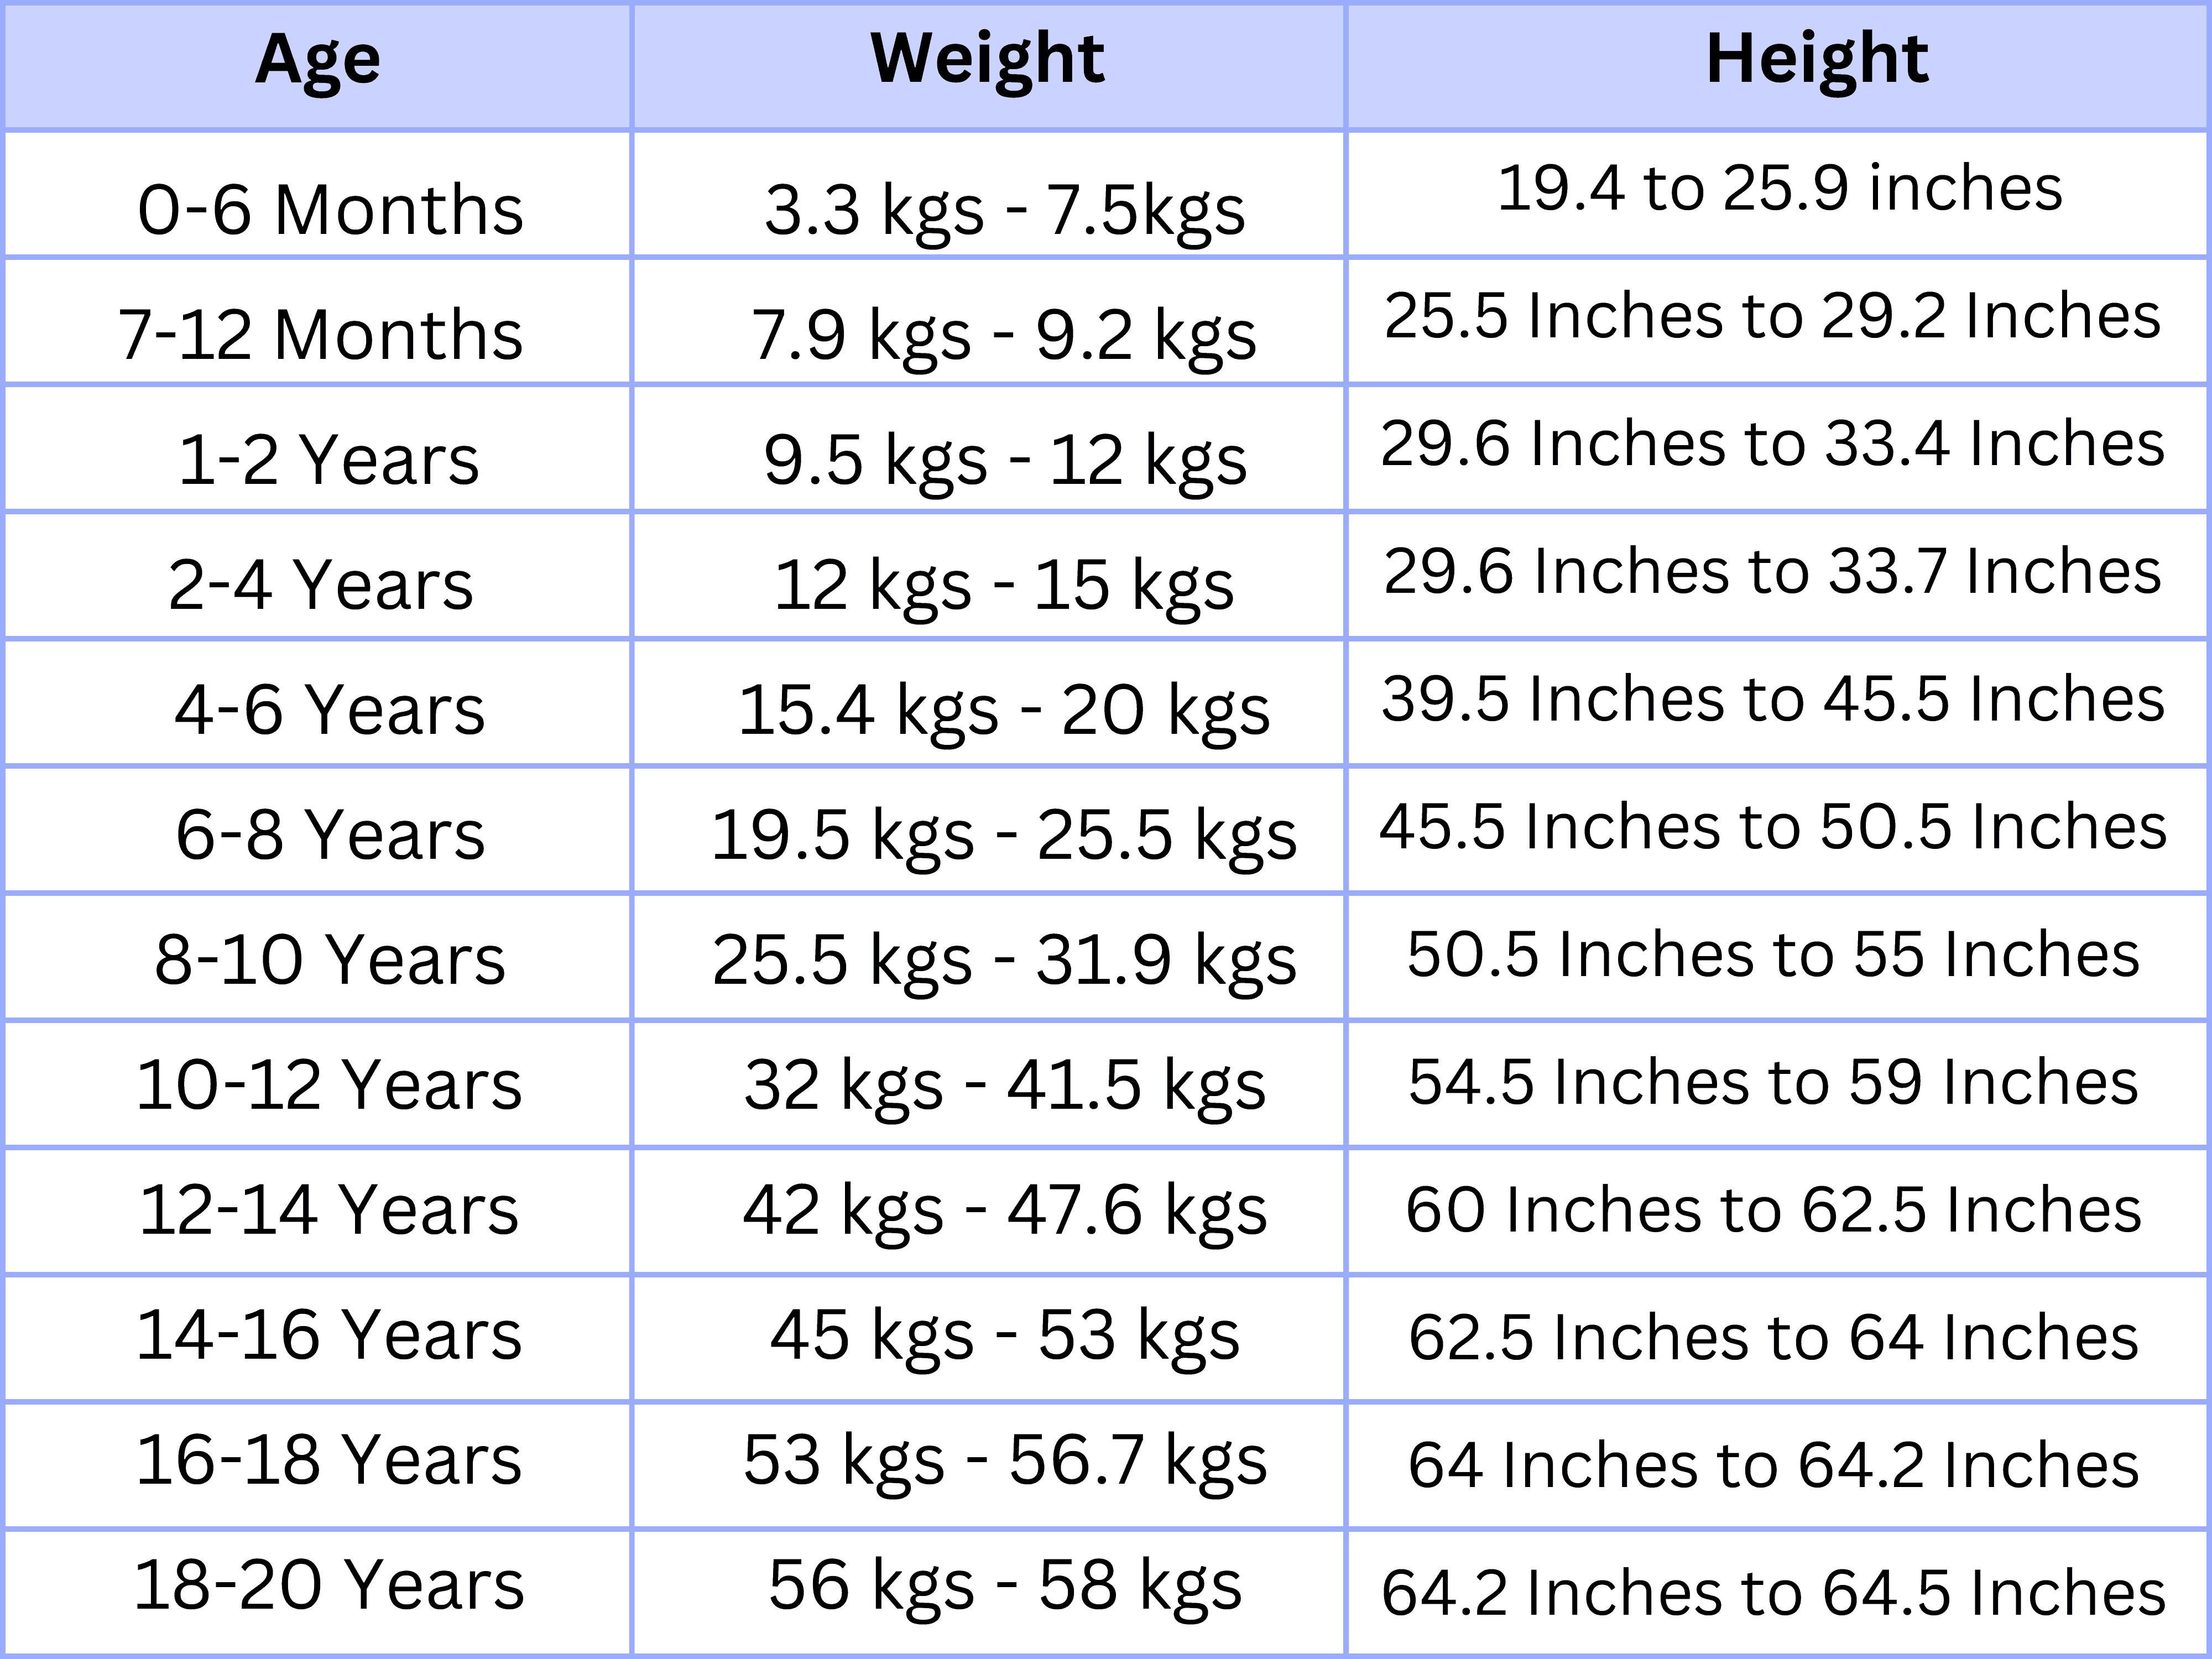 Actual heights L (including shoes), height measurements M (averaged